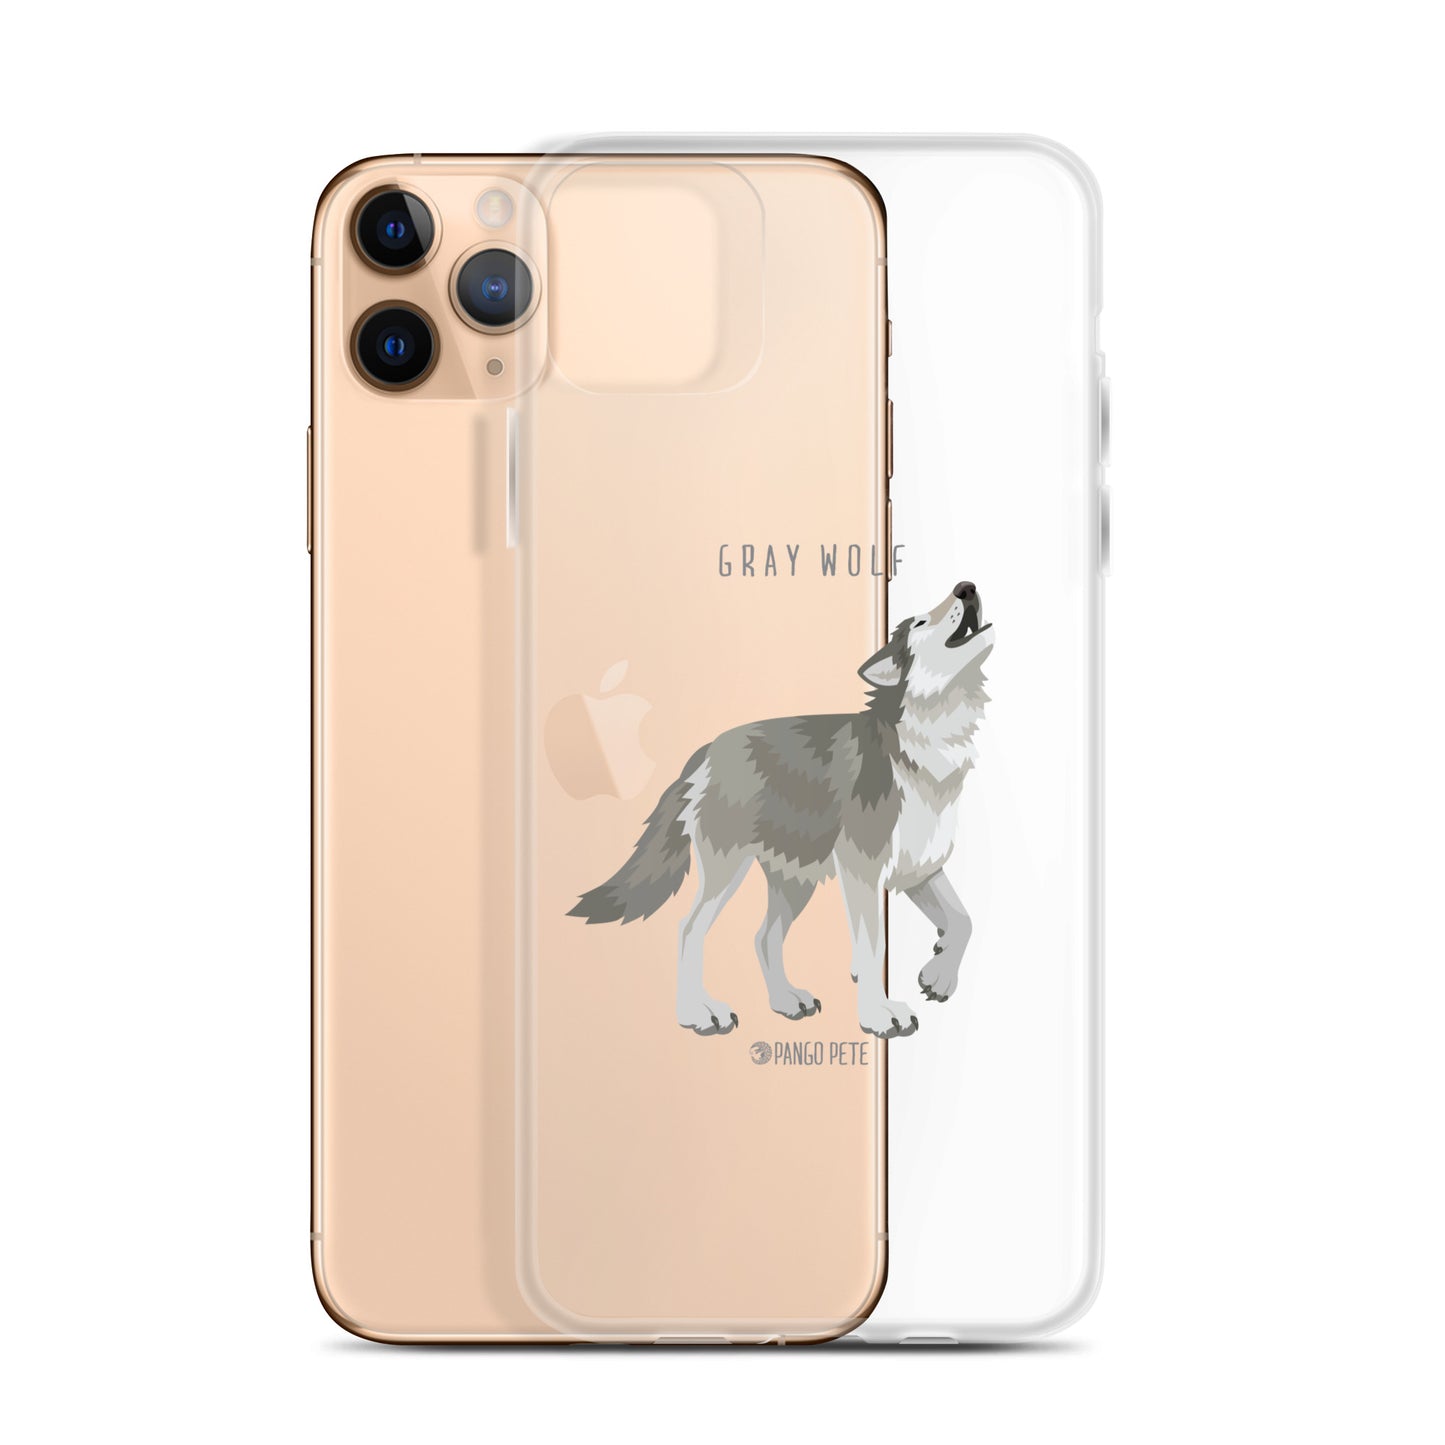 Gray Wolf iPhone Case